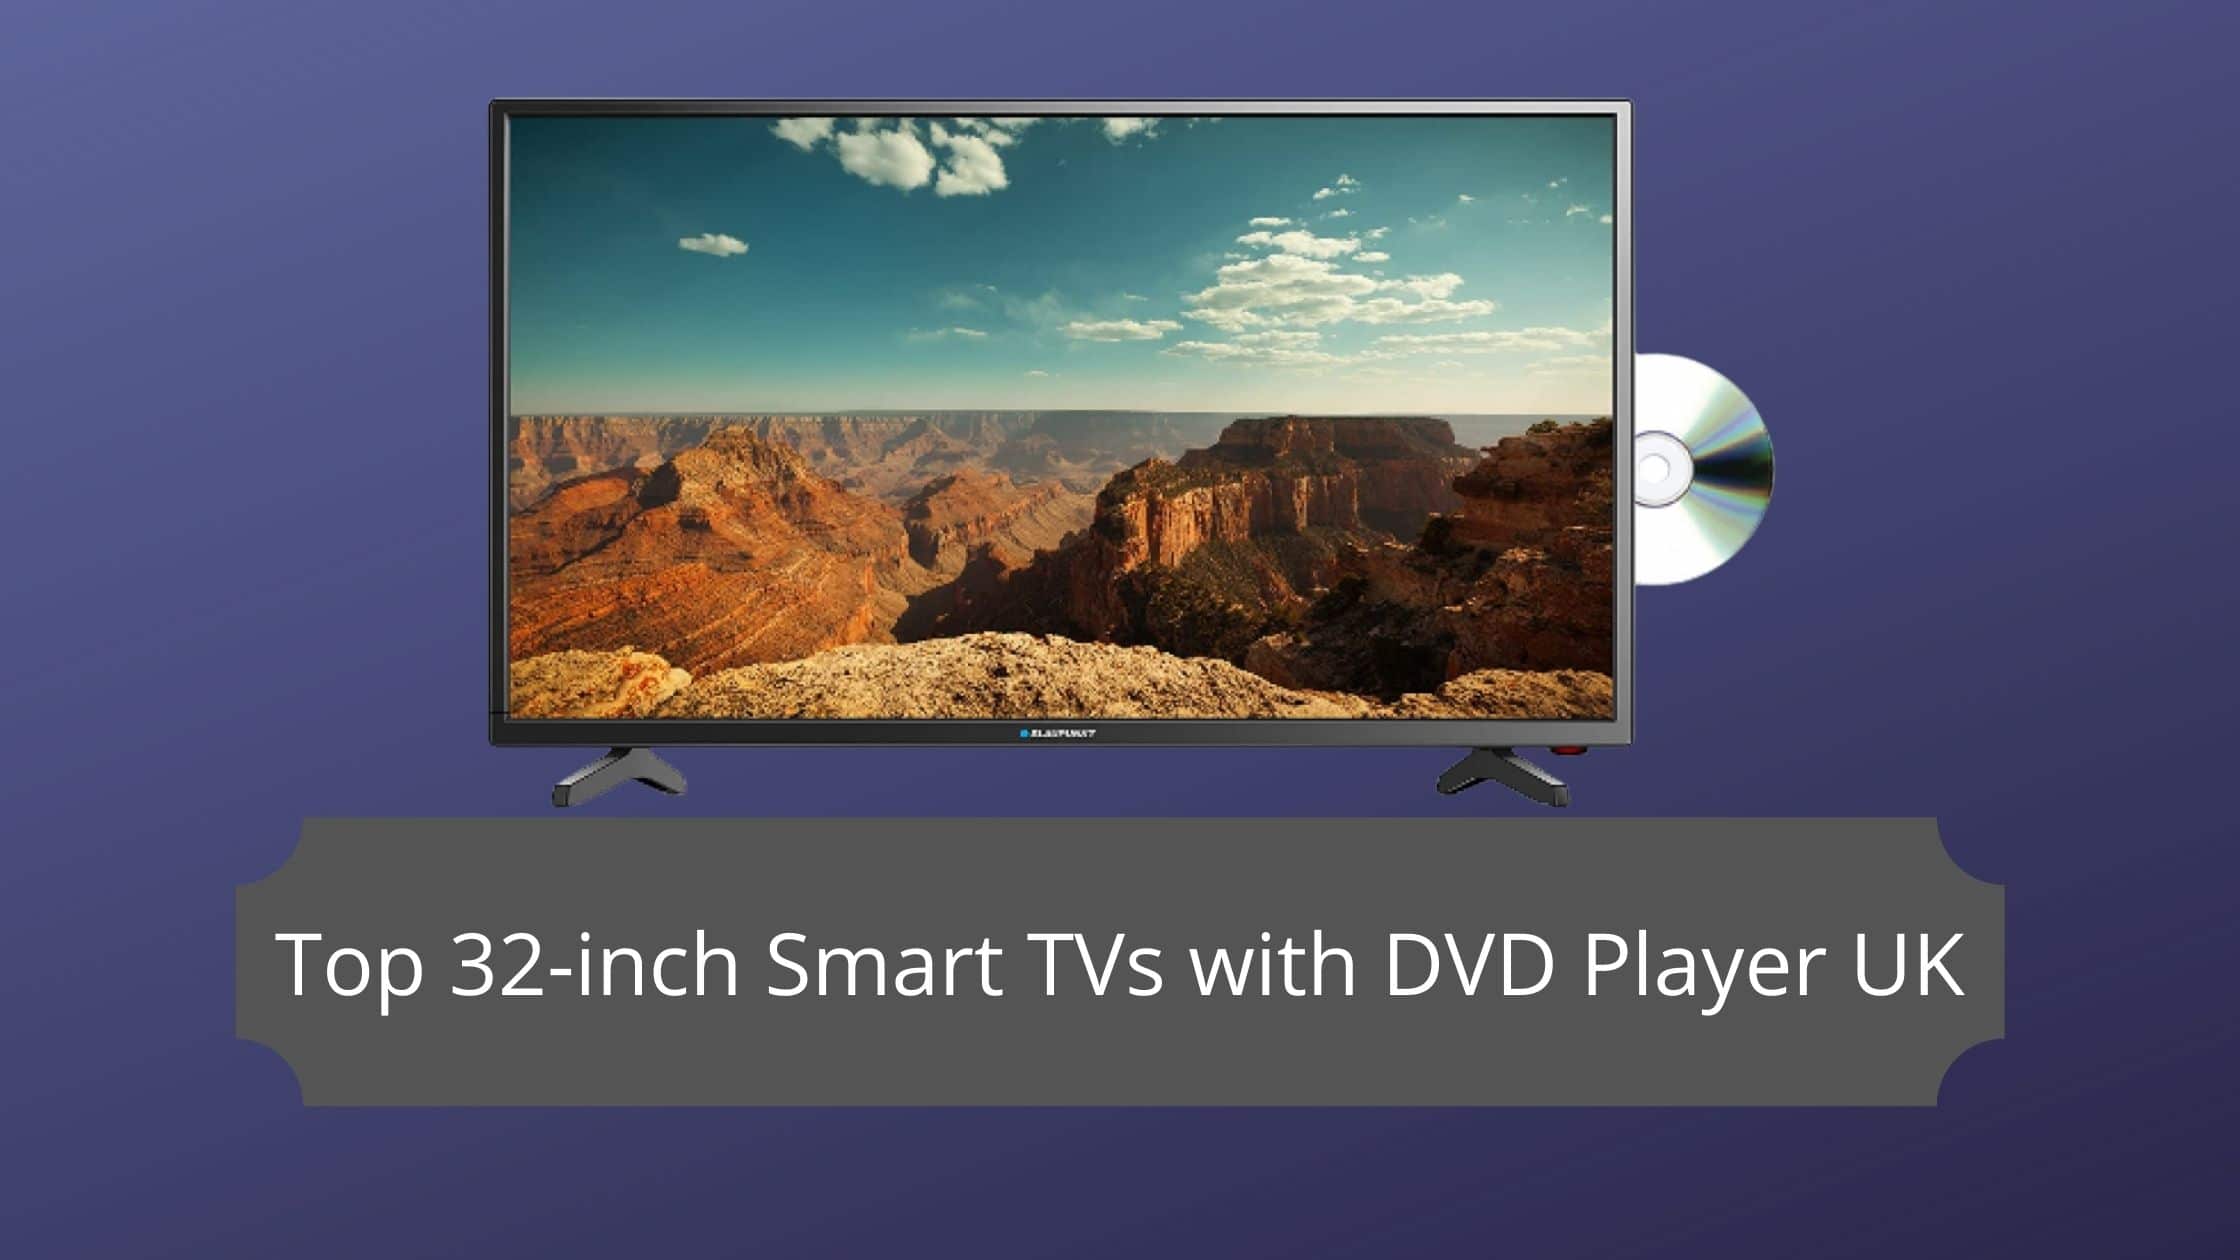 Top 32-inch Smart TVs with DVD Player UK